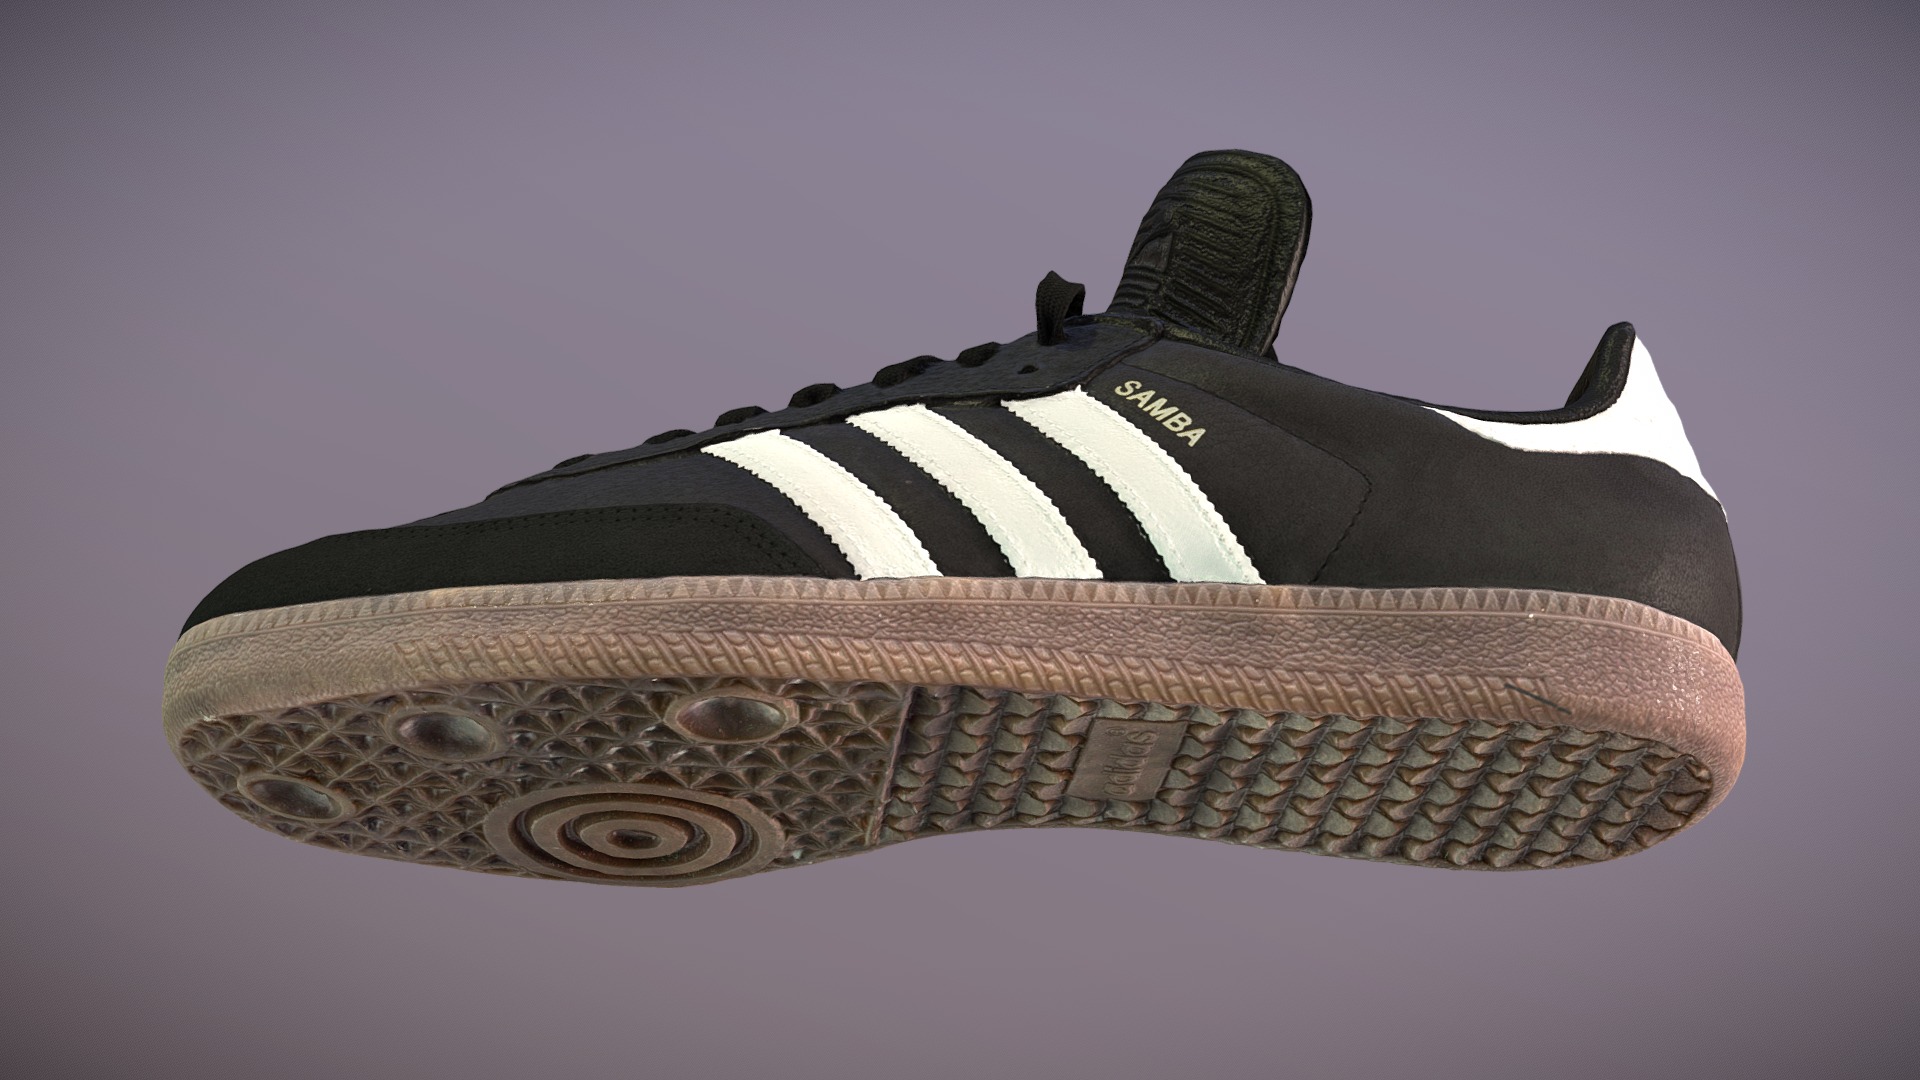 3D model Adidas Samba Classic - This is a 3D model of the Adidas Samba Classic. The 3D model is about a black and white shoe.